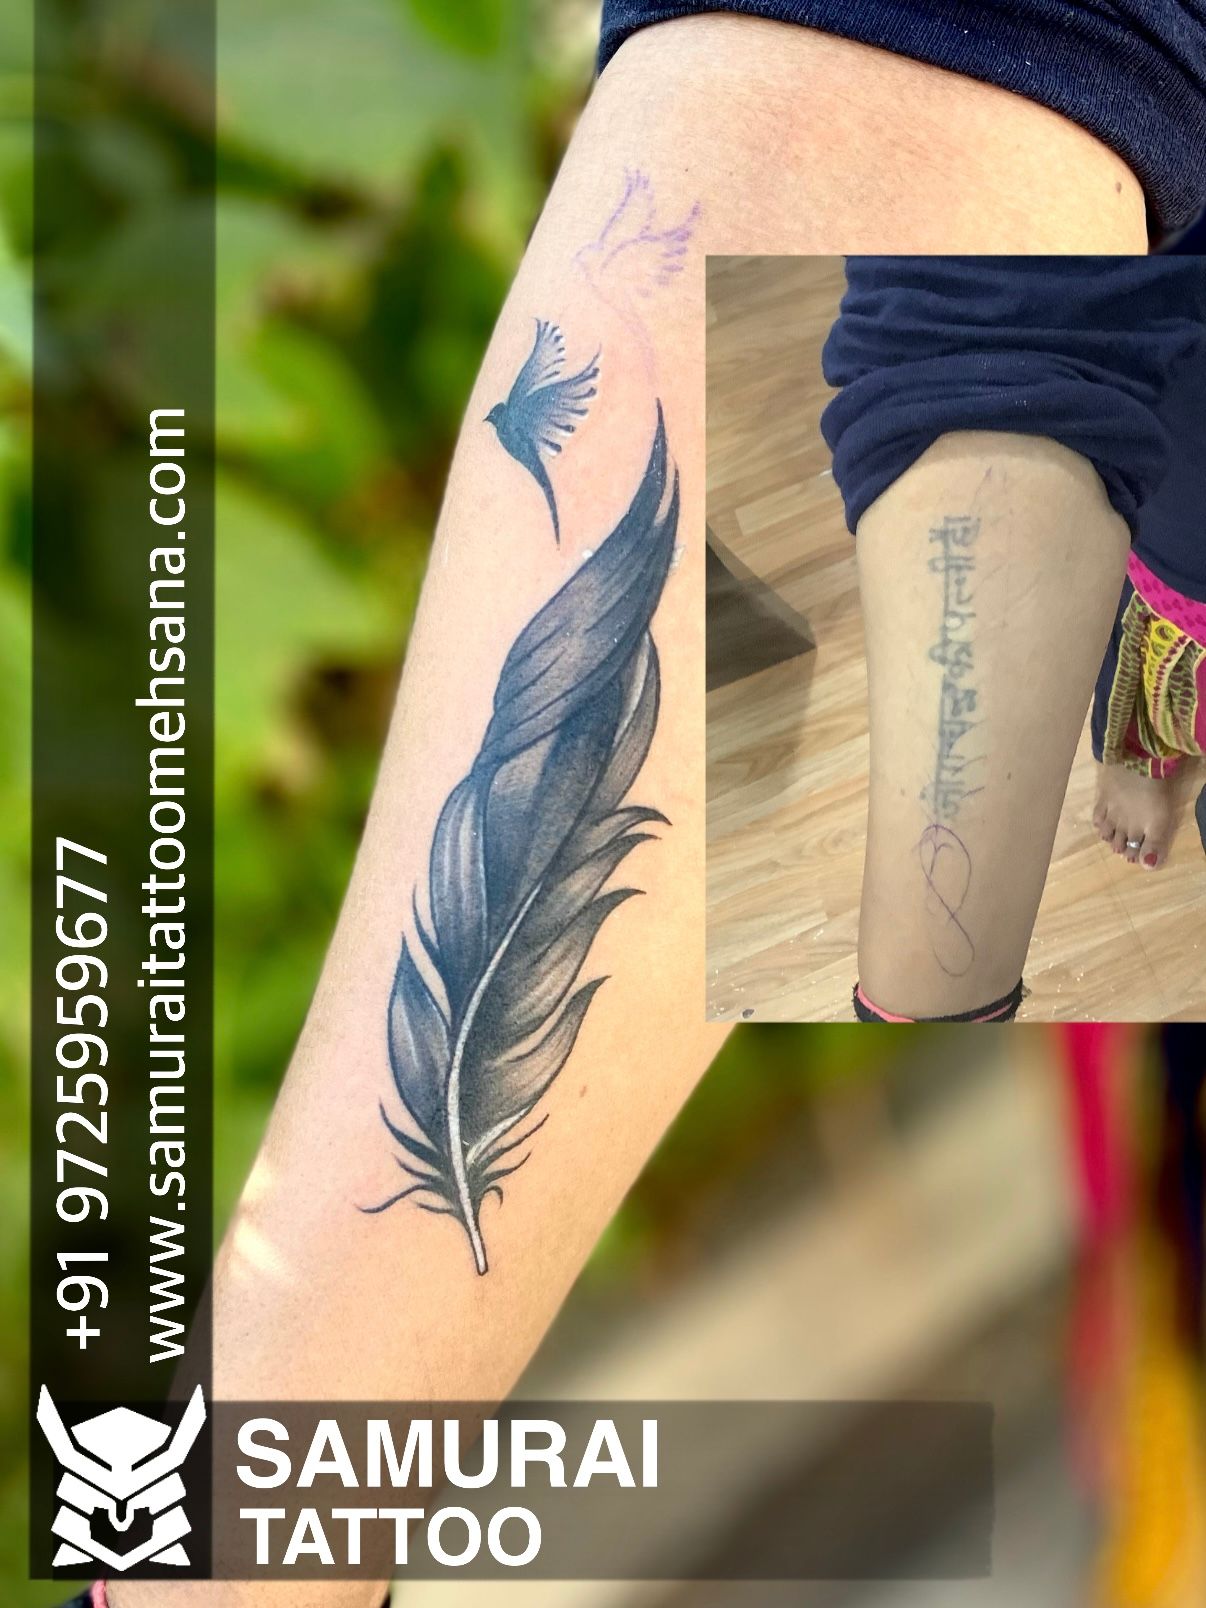 Tattoo uploaded by Vipul Chaudhary • Feather tattoo, Tattoo for girls, Feather tattoo design